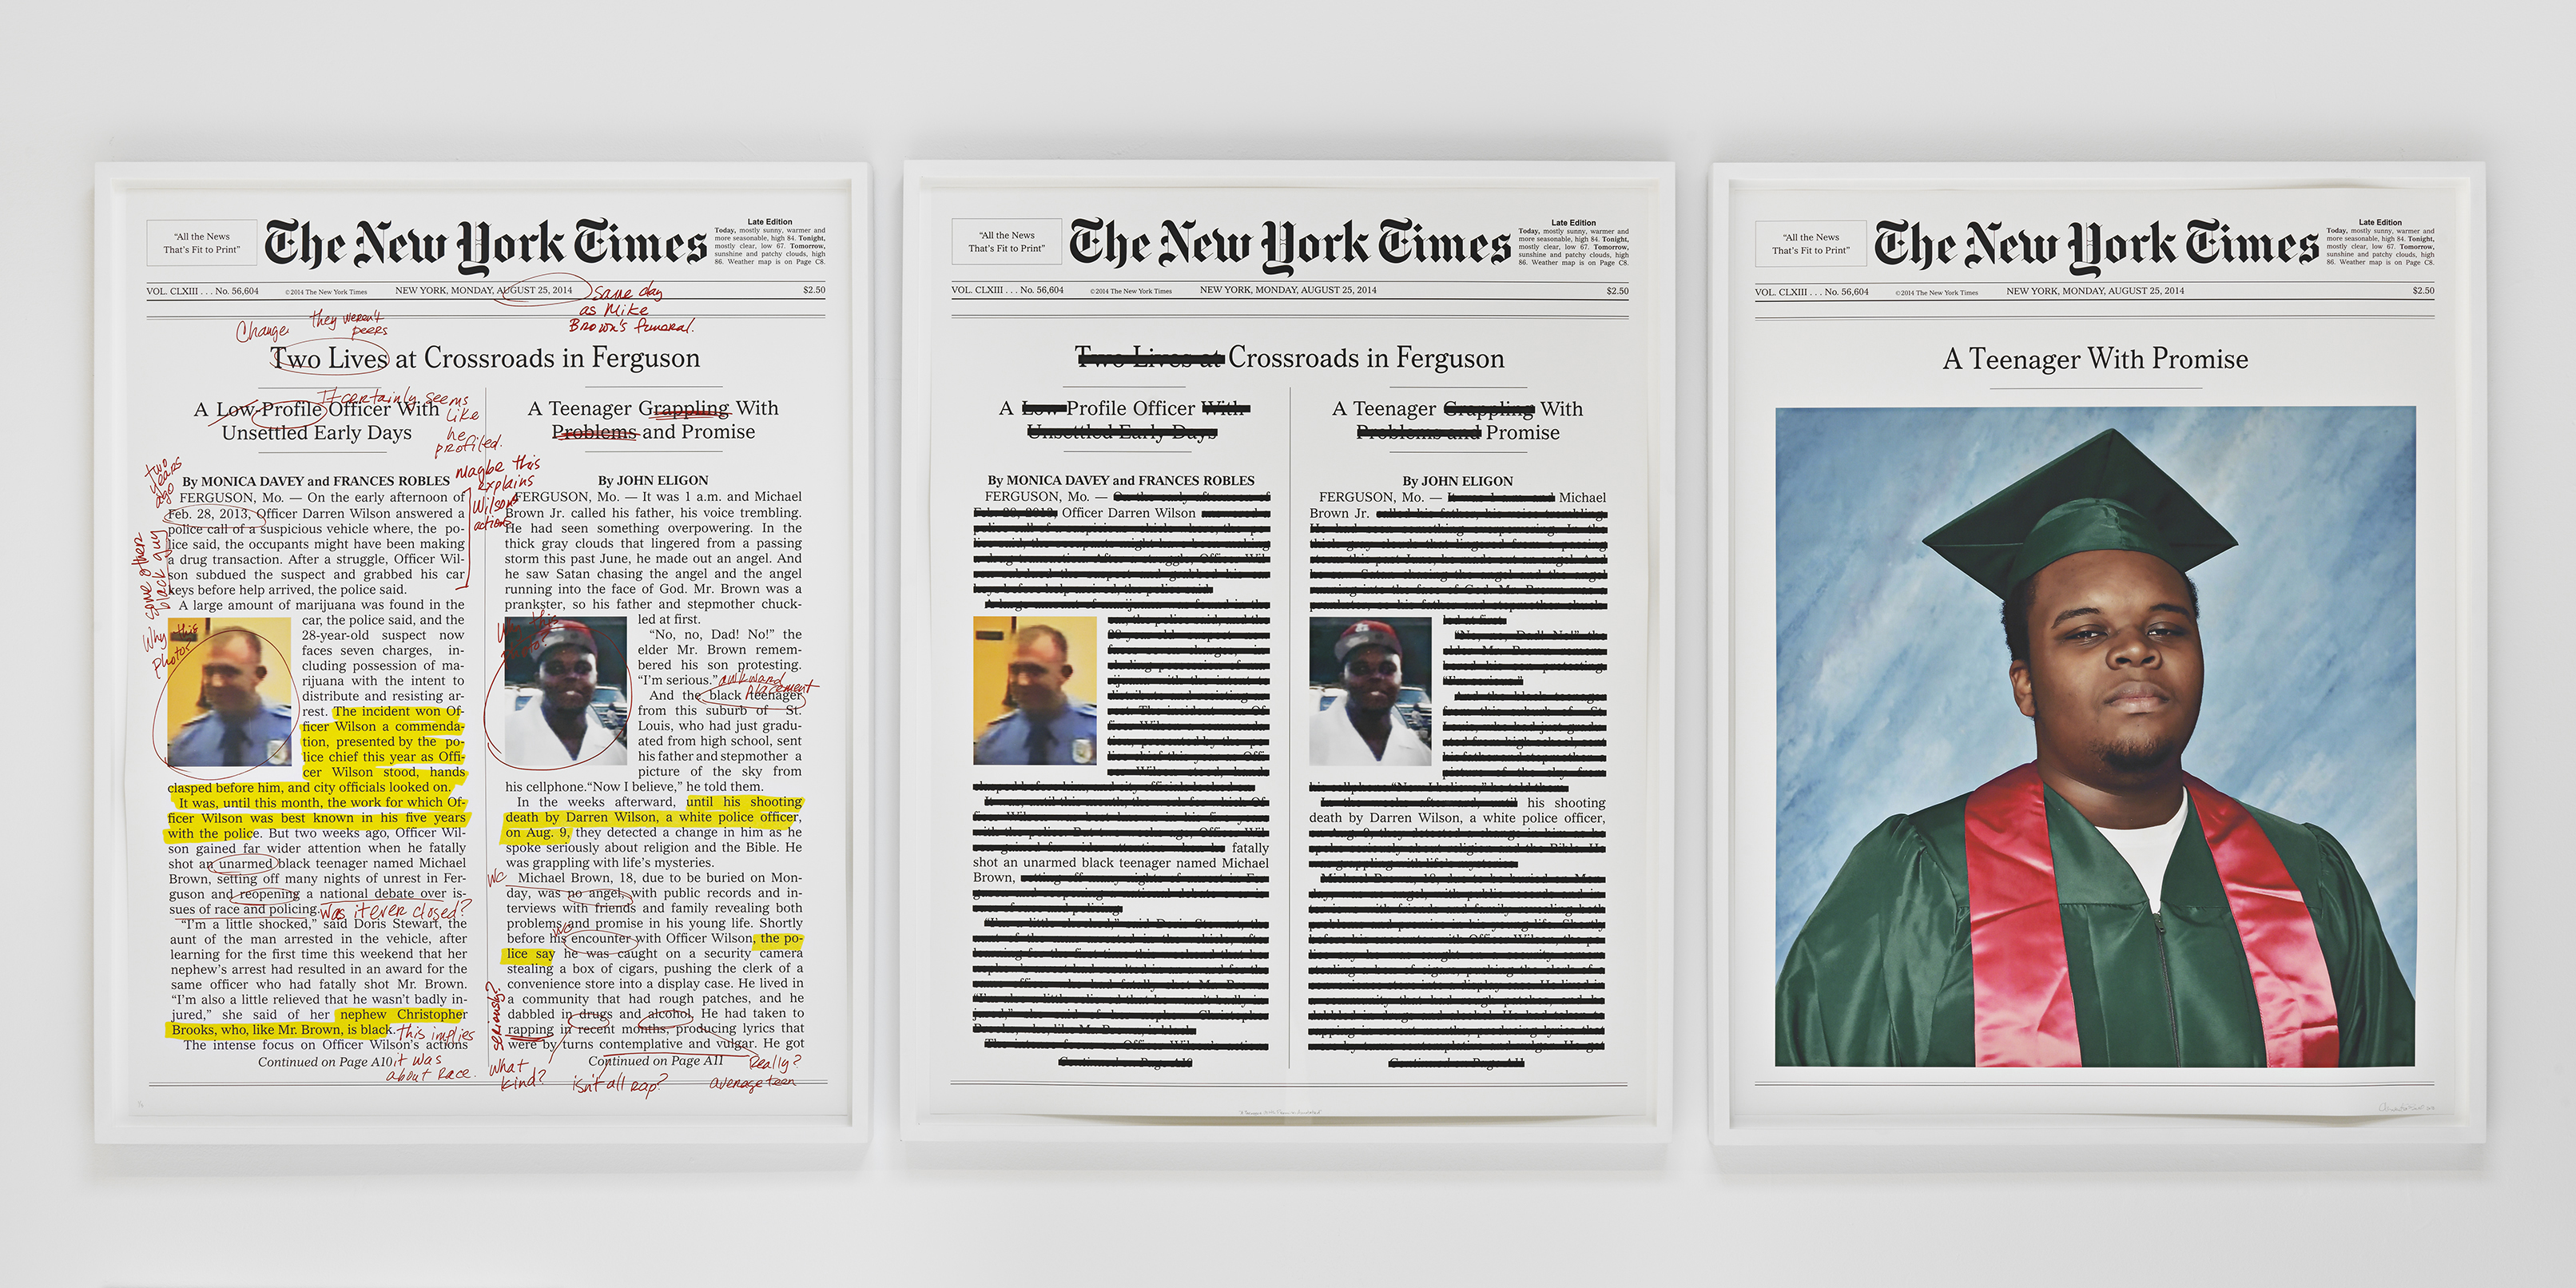 Three “The New York Times” front pages. The first has highlights and notes in red questioning the choice of words in the article. An image of a white police officer, Darren Wilson, in a blue uniform is on the left side of the page. It is circled “Why this photo?” On the right side of the page is an image of Michael Brown Jr., a black teenager, also circled “Why this photo?”. The second page is identical to the first, but most of the text is redacted to read “FERGUSON, Missouri. Officer Darren Wilson fatally